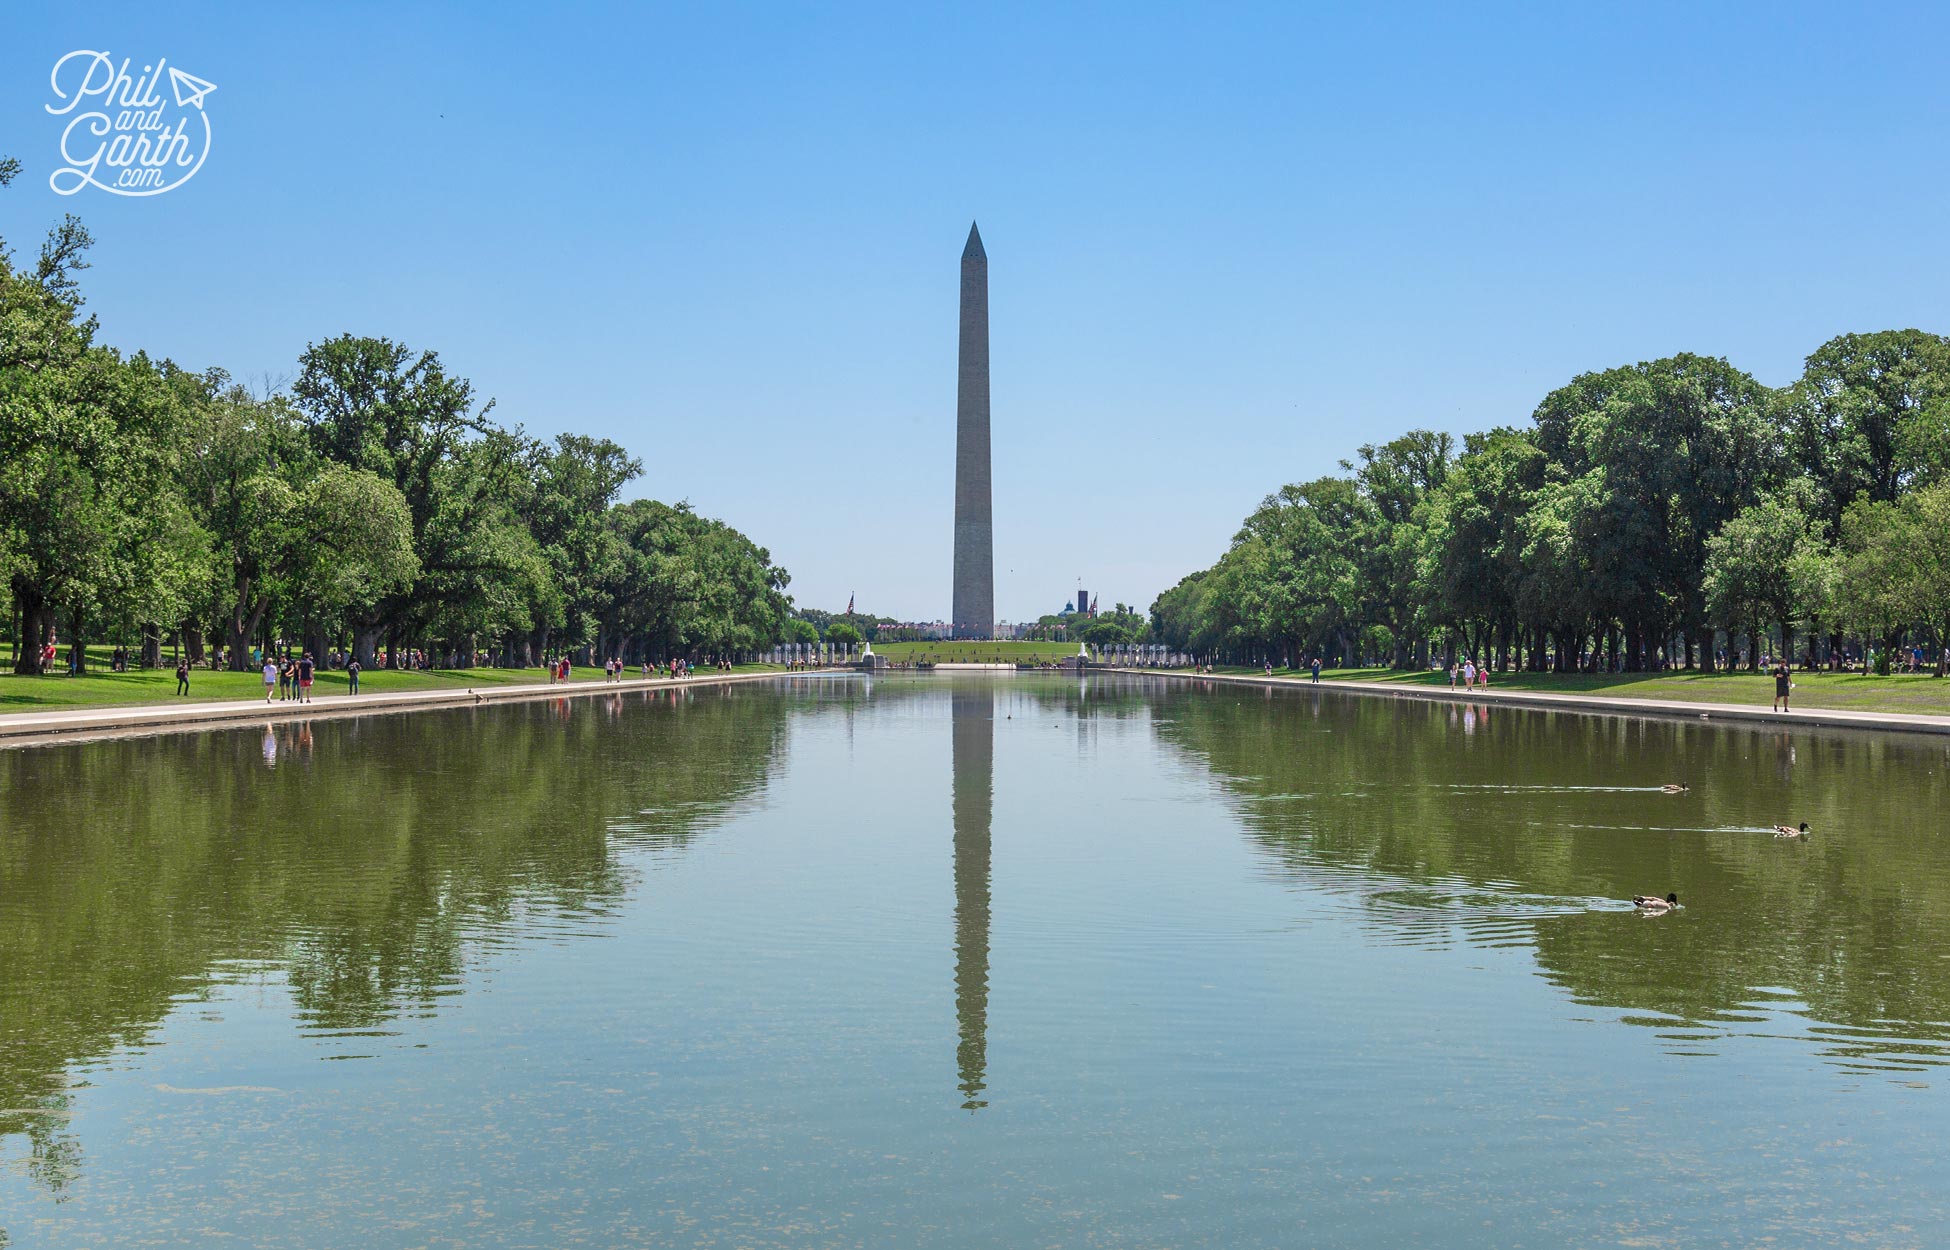 The Washington Memorial photographed from the Lincoln reflection pool